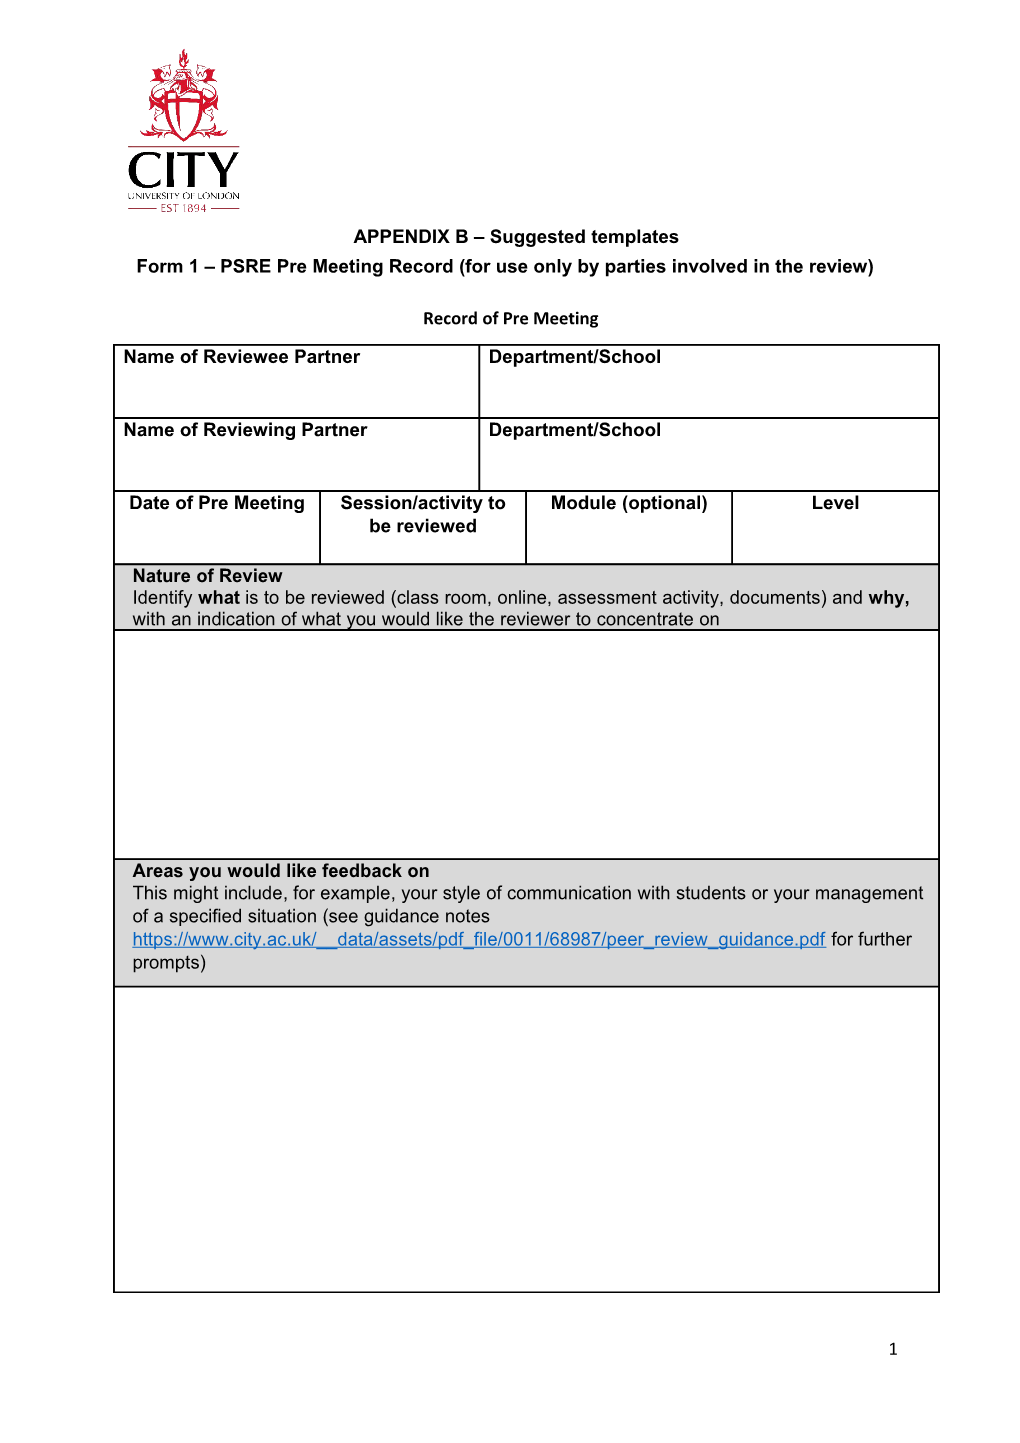 Form 1 PSRE Pre Meeting Record (For Use Only by Parties Involved in the Review)